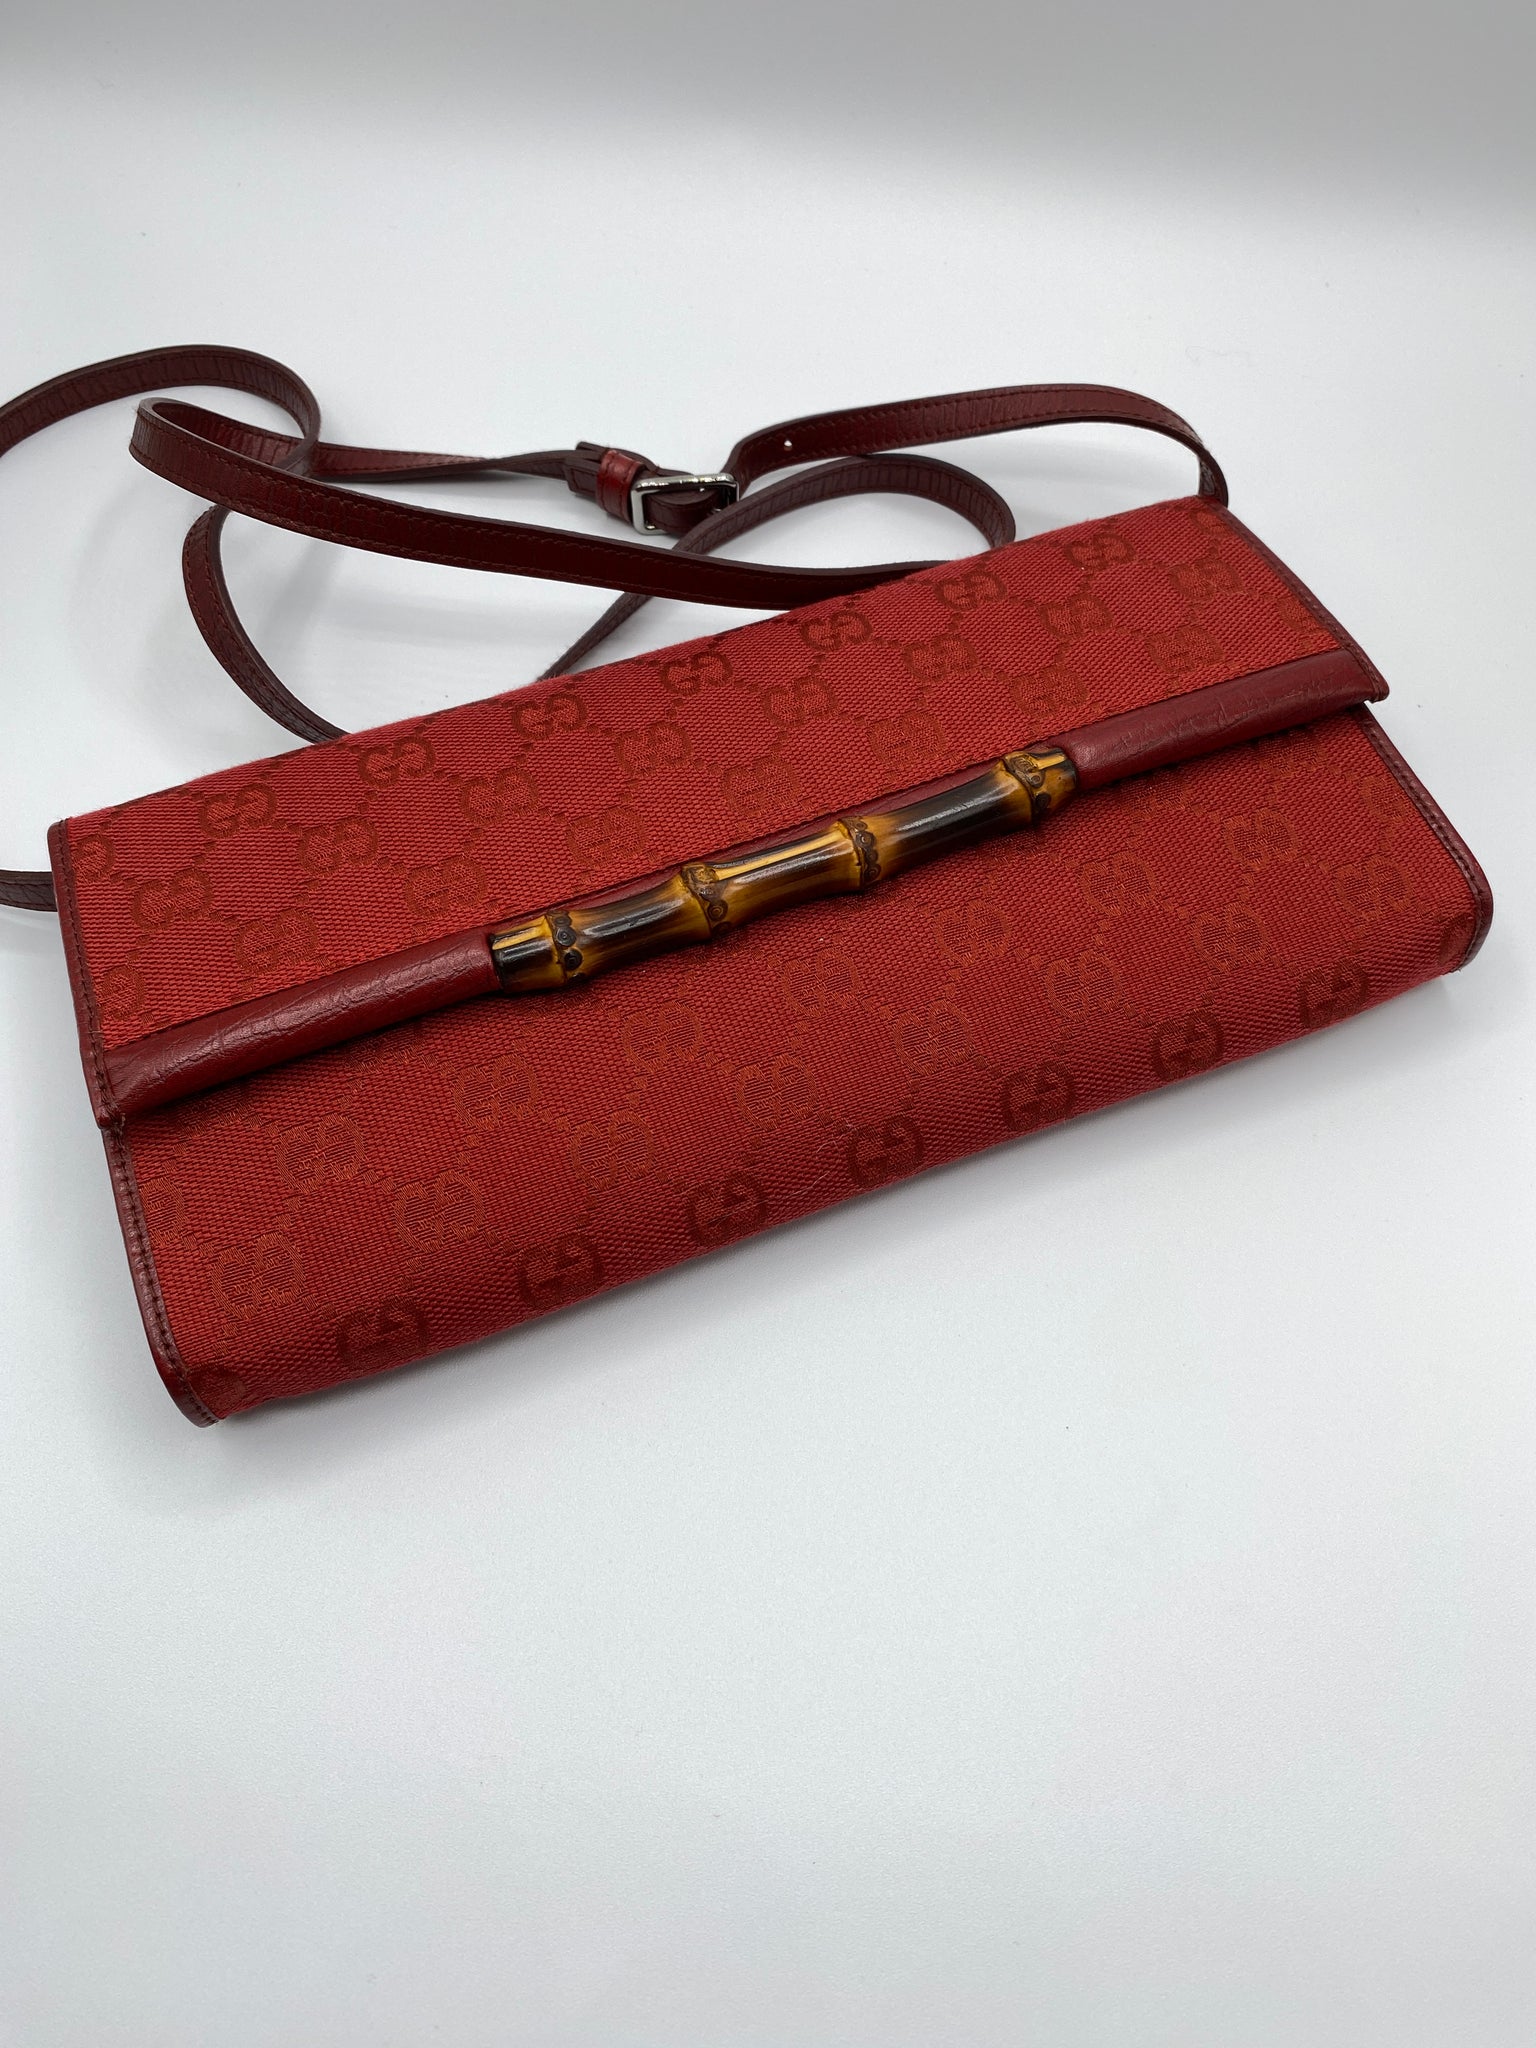 Gucci Bamboo Vintage Clutches